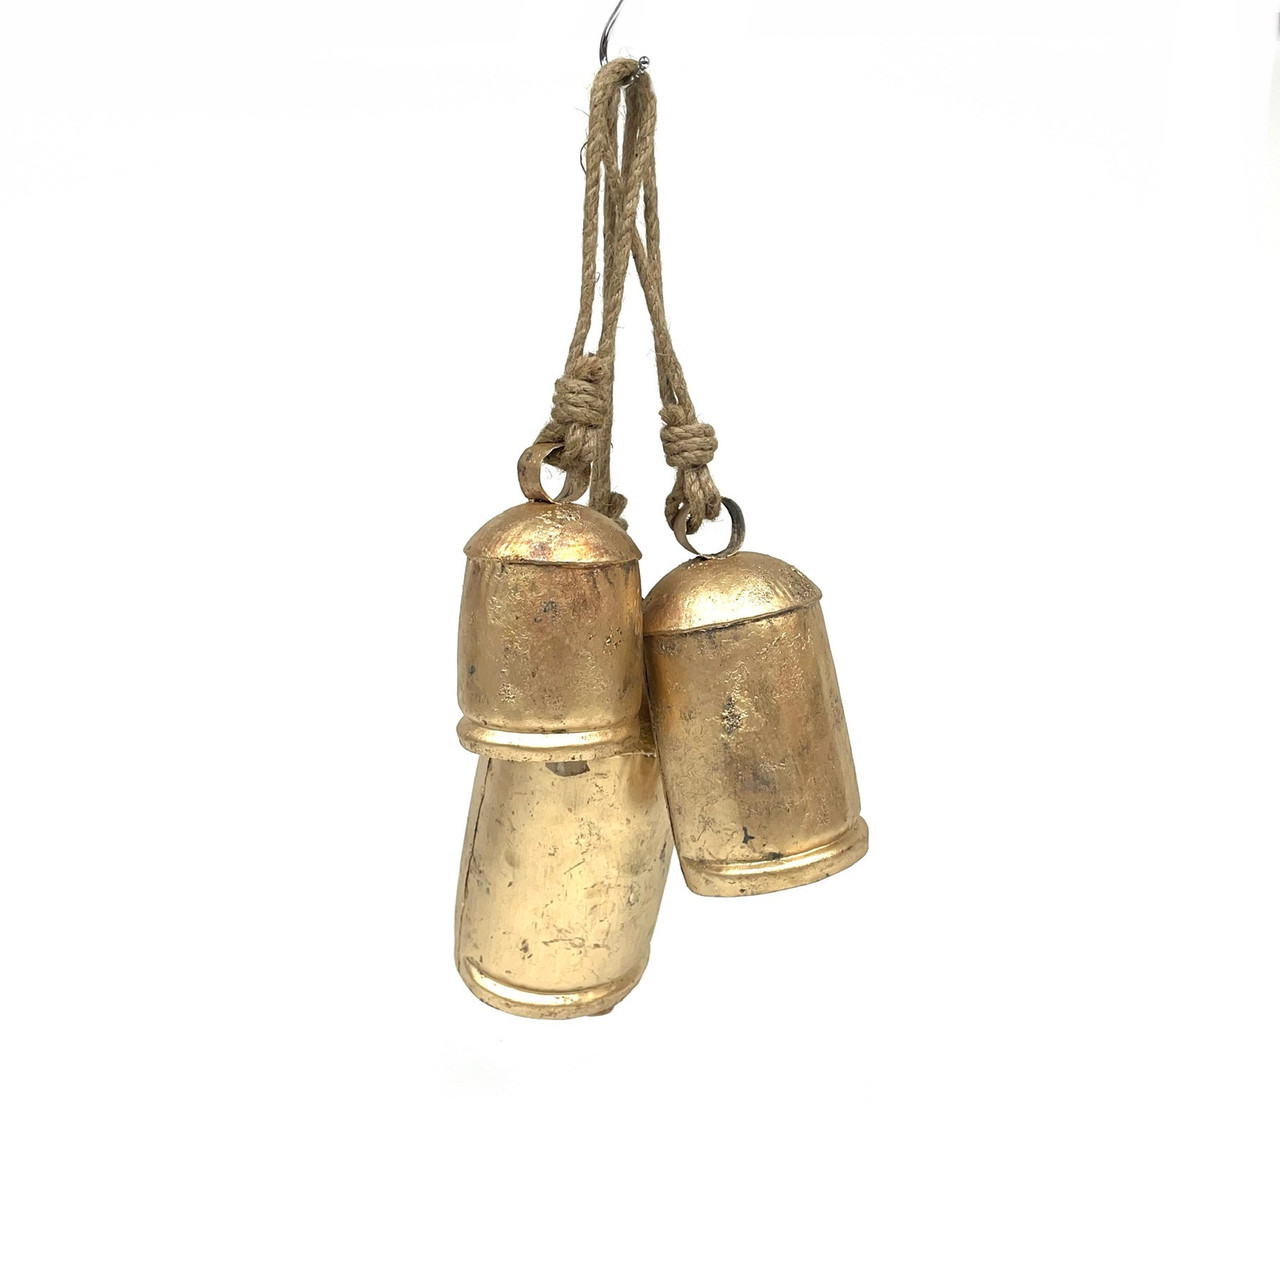 Rustic Cow Bells on Rope Set of 3 - 3, 4, 5 Tall - Paykoc